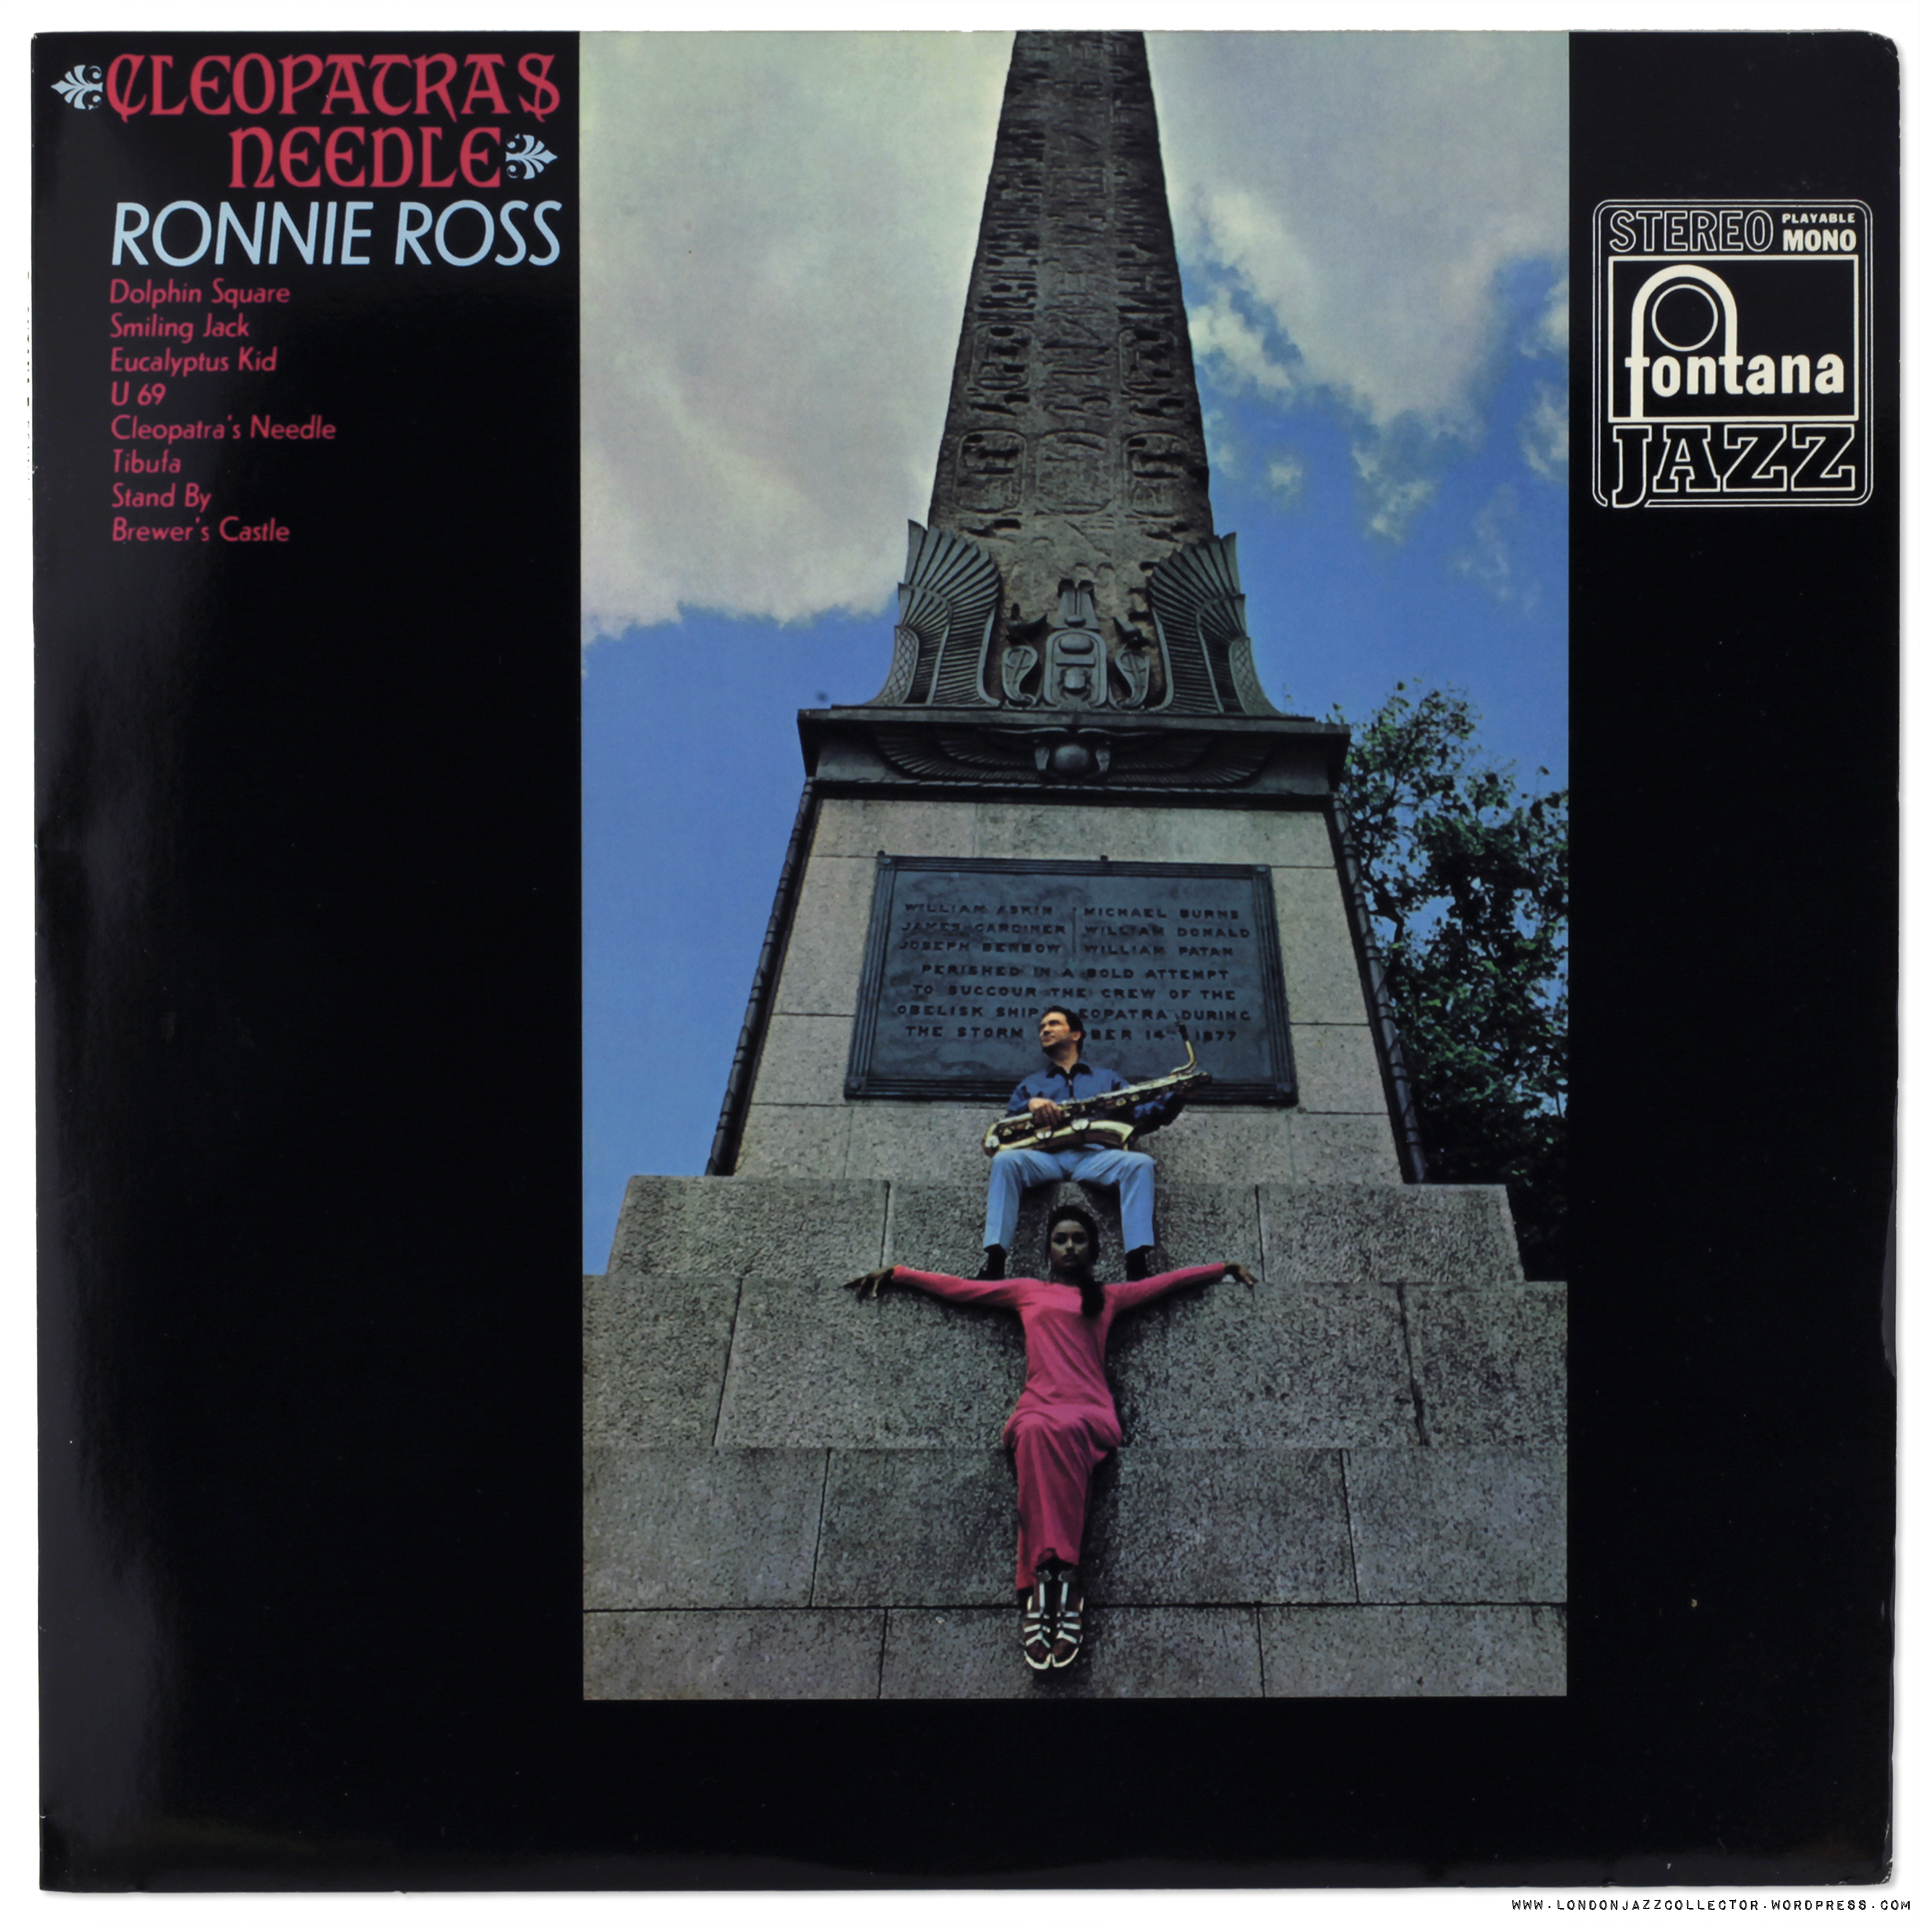 ronnie-ross-cleopatras-needle-cover-font